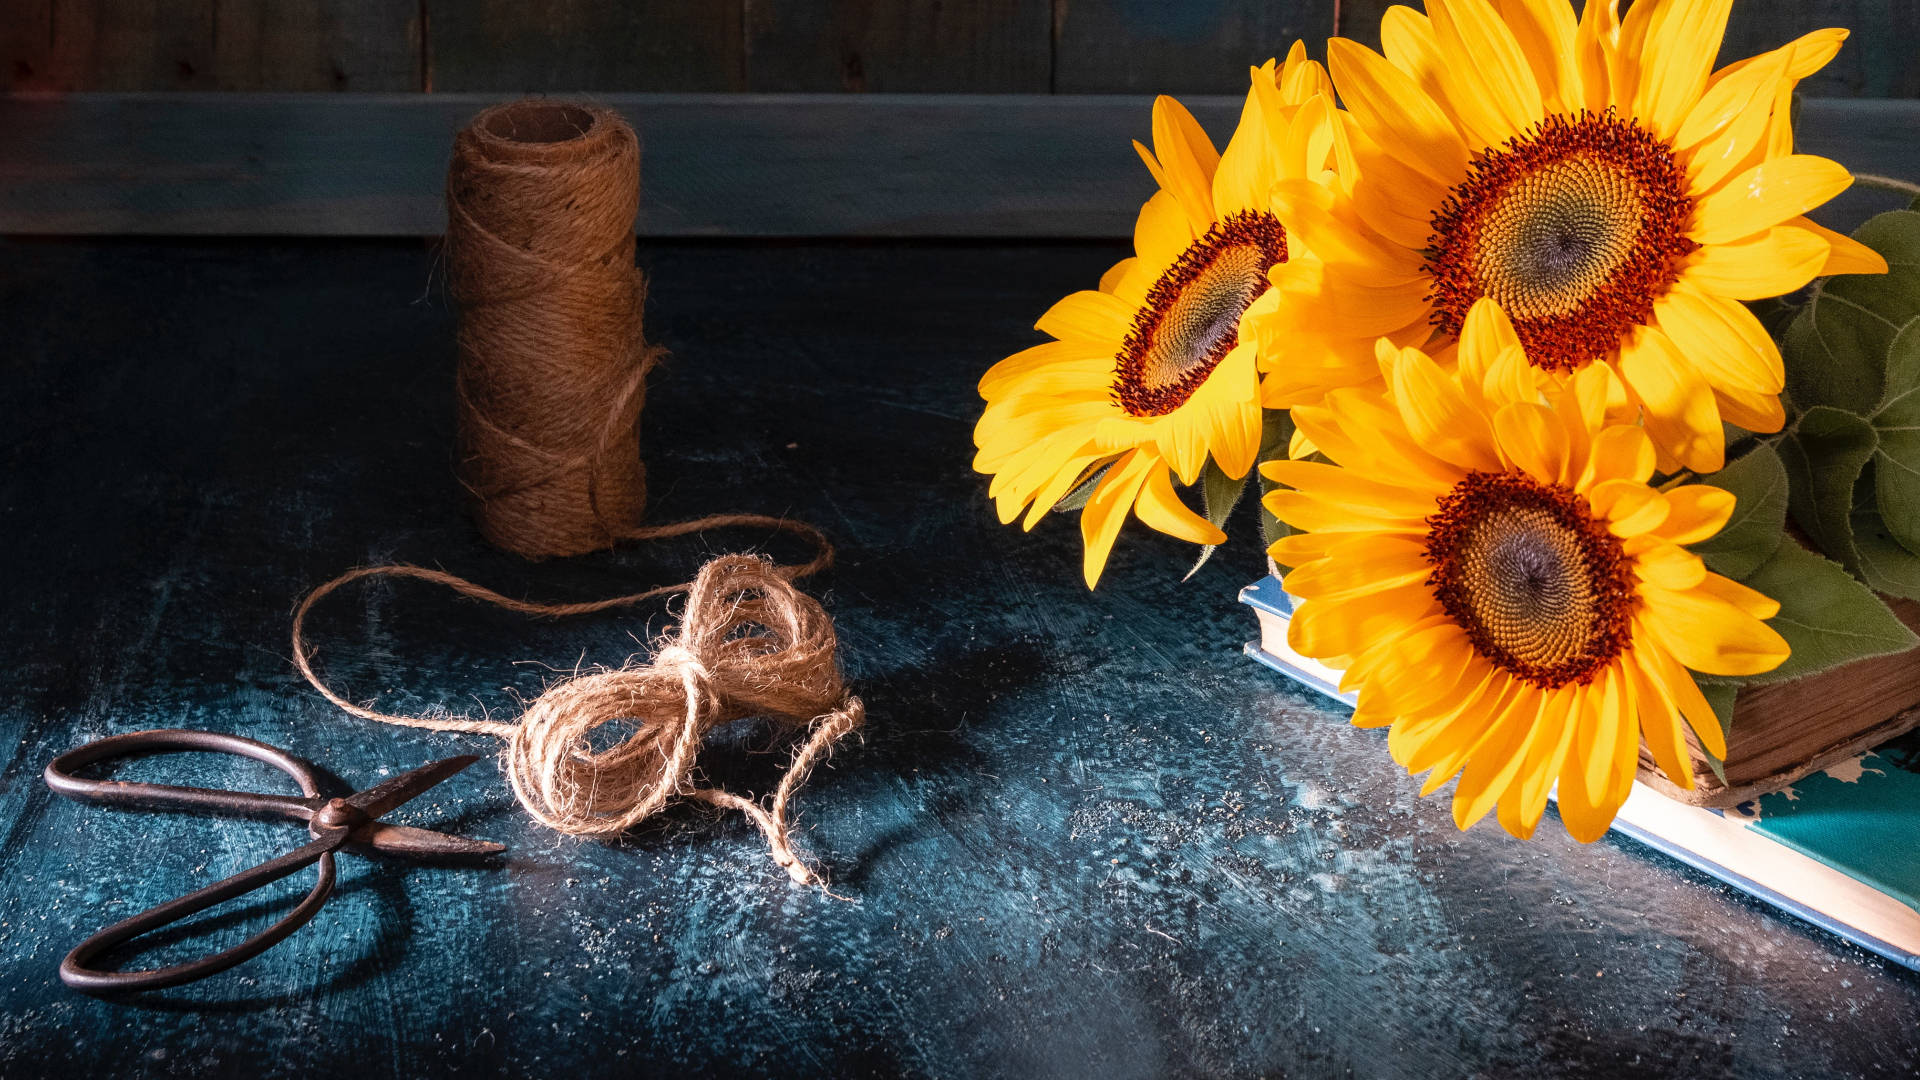 Twine And Sunflower Laptop Wallpaper